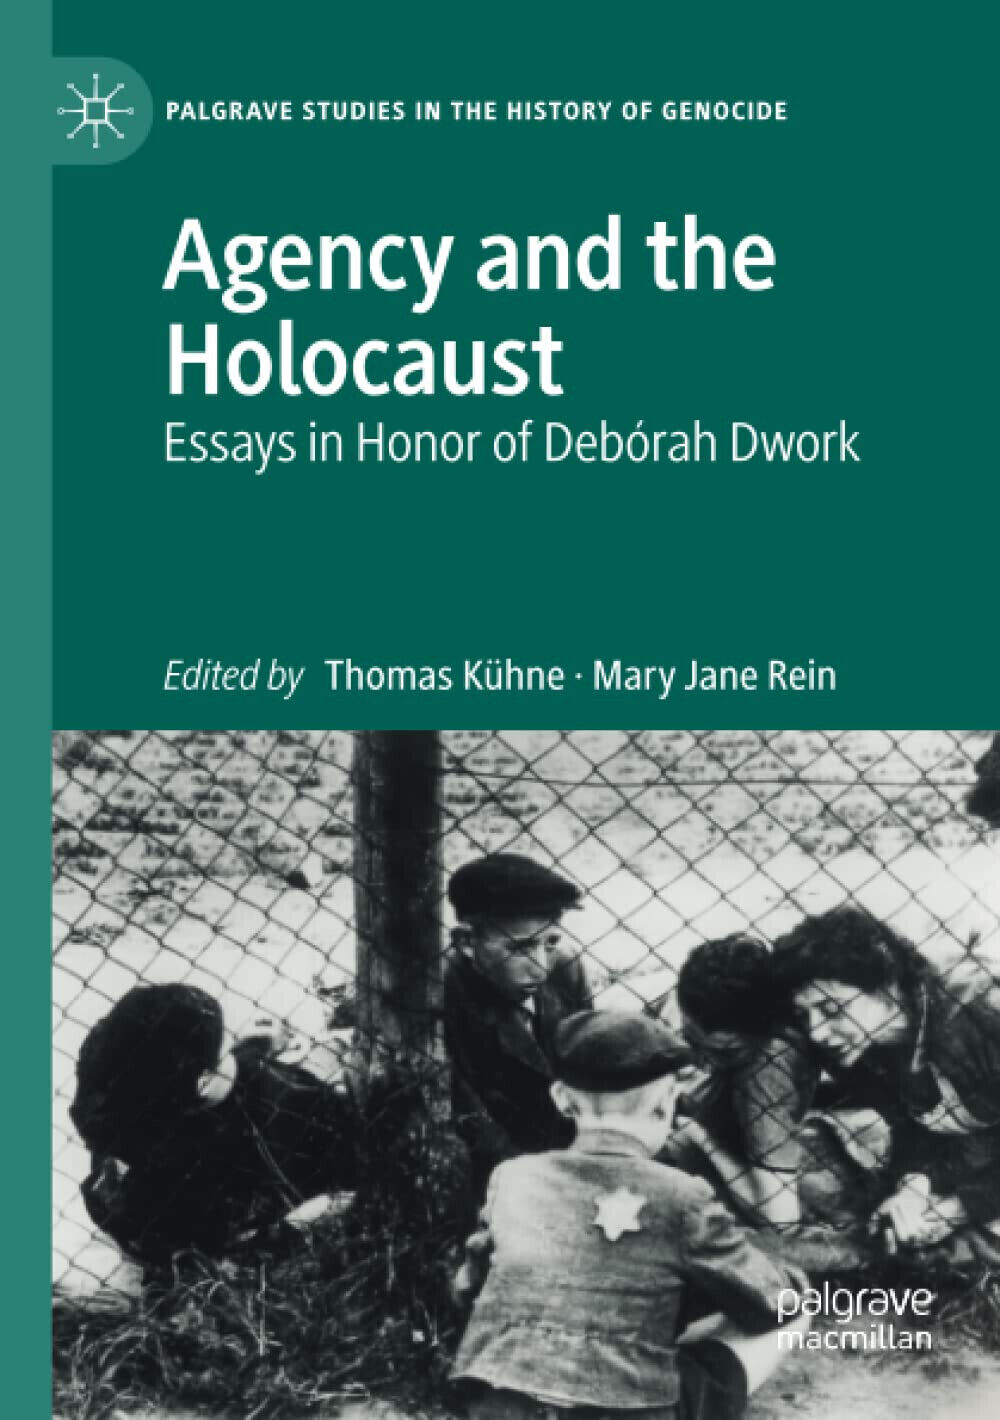 Agency and the Holocaust - Thomas K?hne - Palgrave, 2021